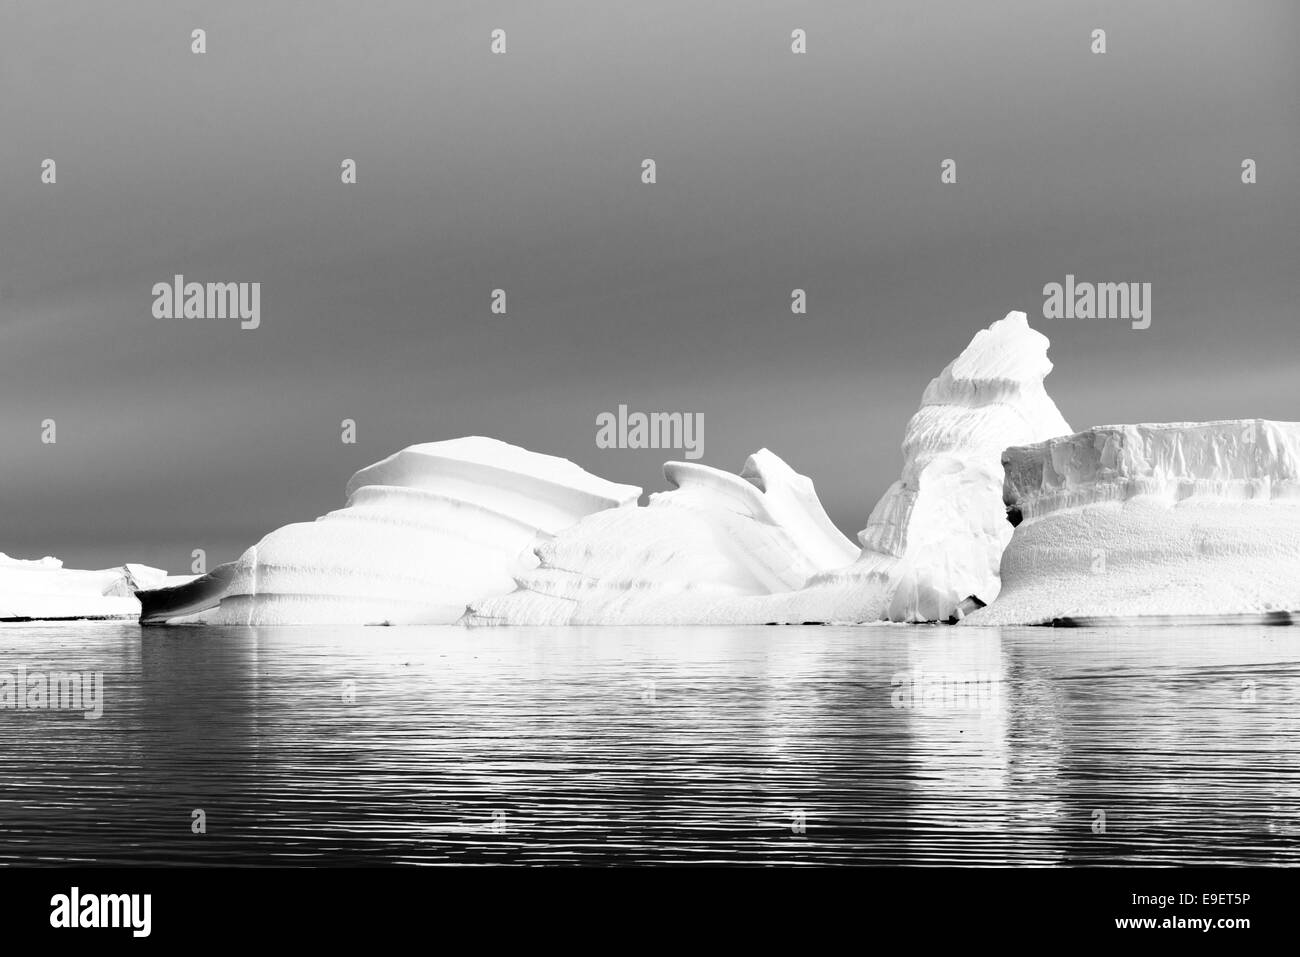 Icebergs in the Lemaire channel, Antarctica Stock Photo